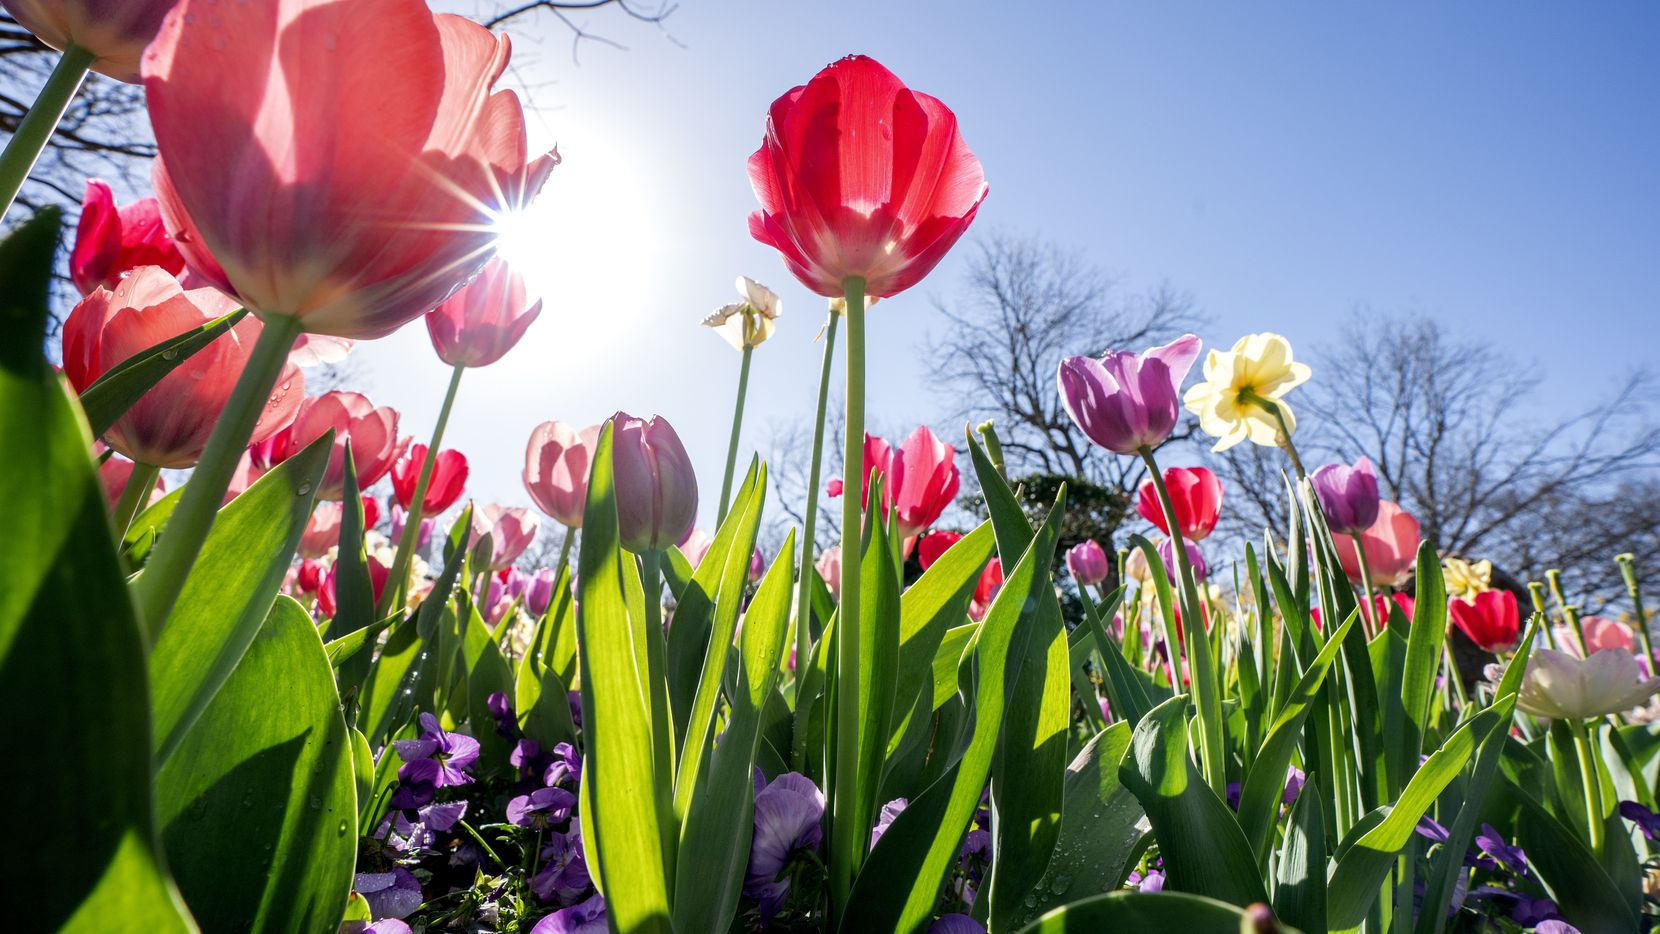 Dallas Blooms Returns with ‘Birds in Paradise’ Theme